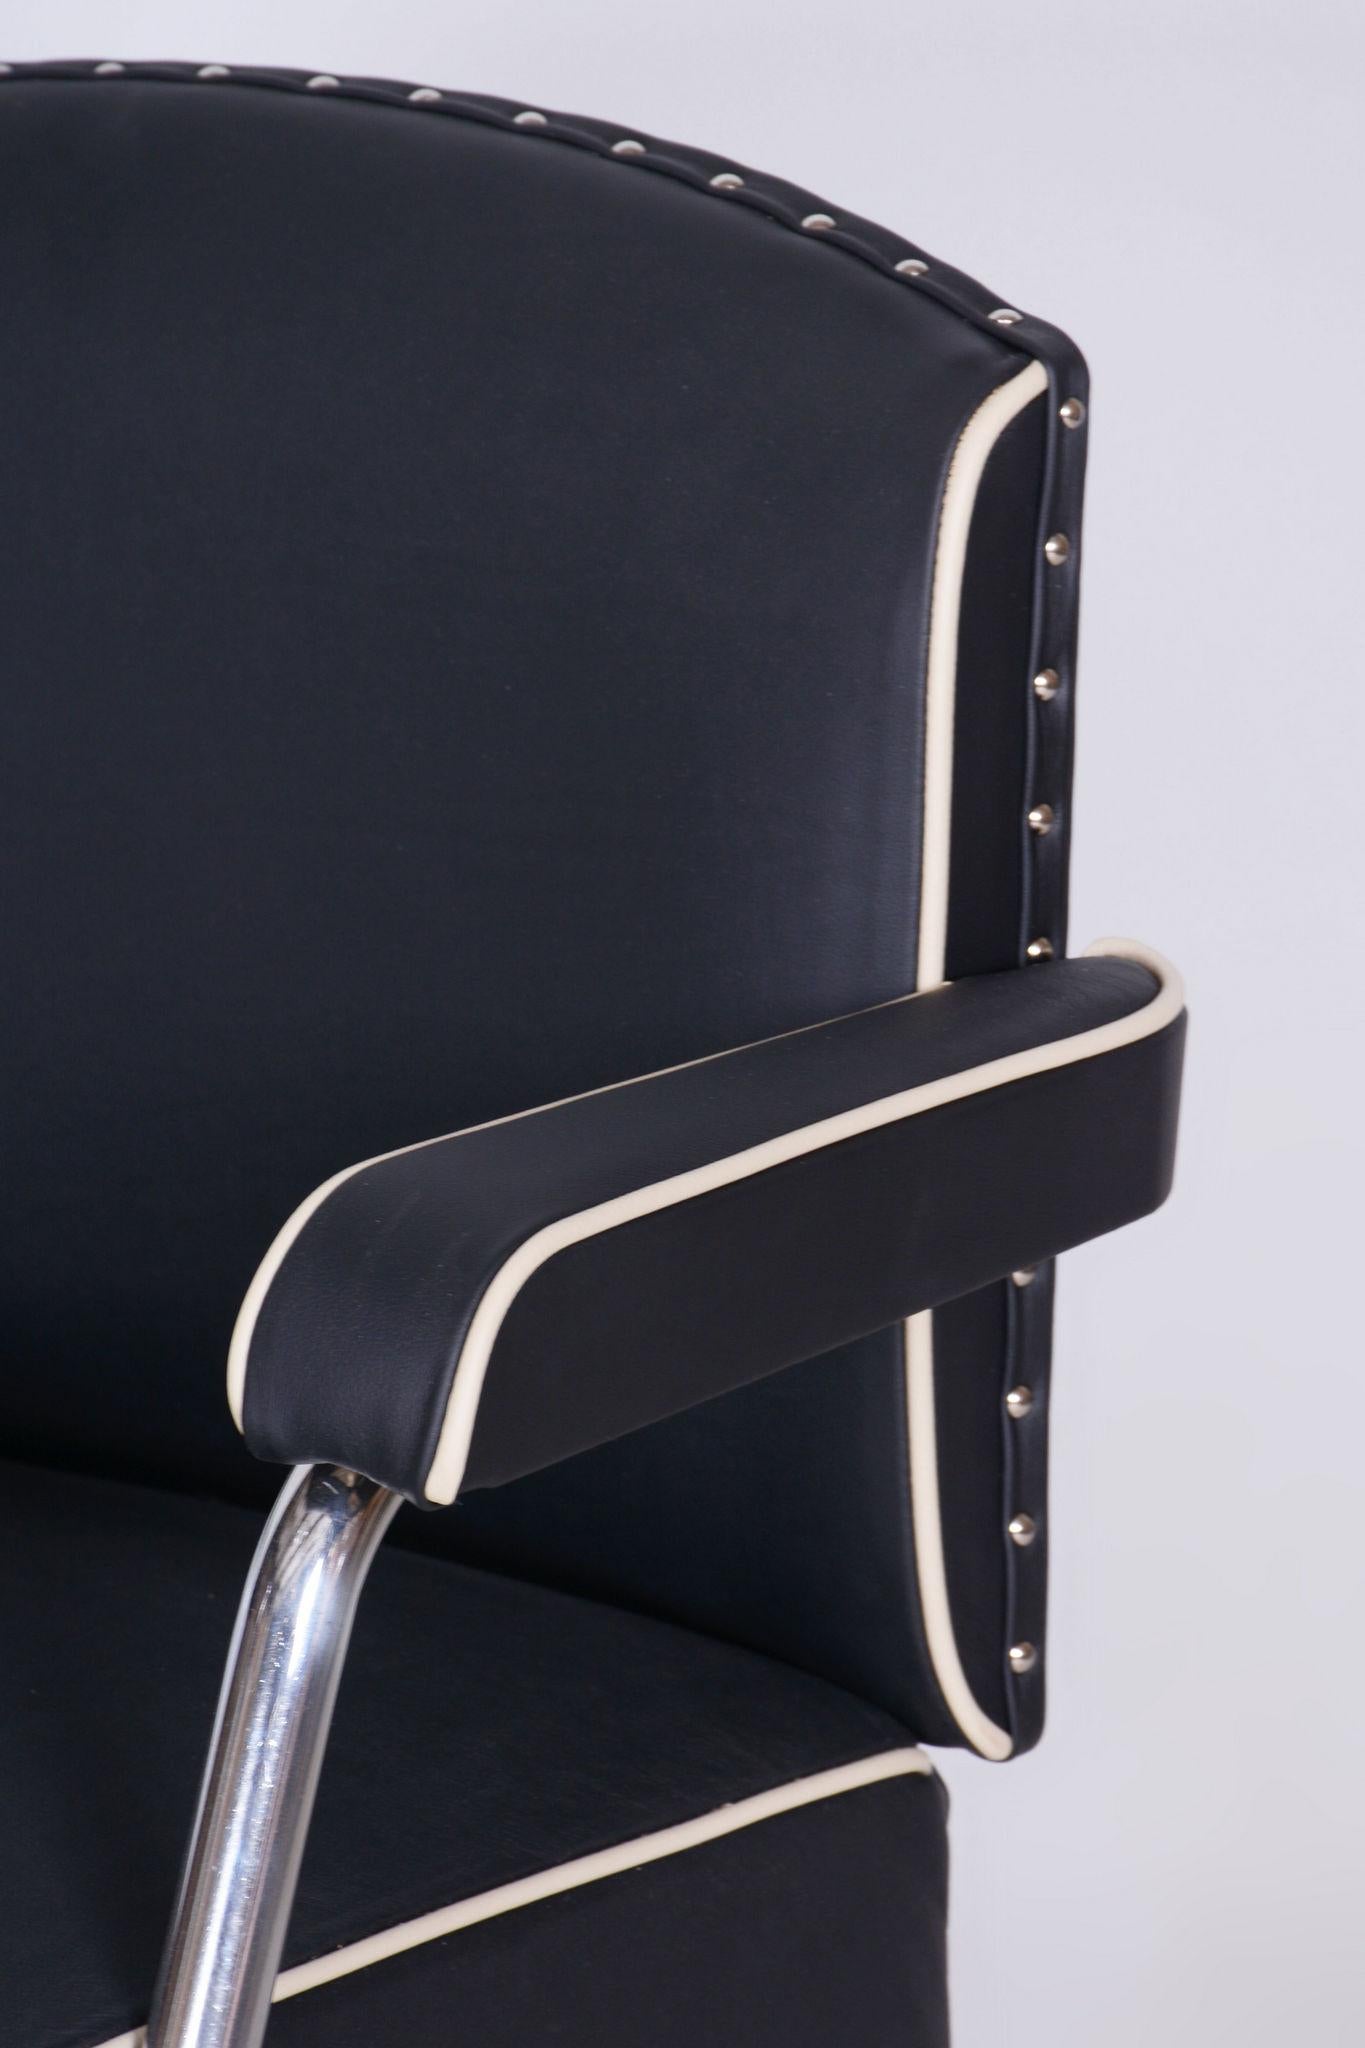 Restored Black Bauhaus Armchair, Mauser, Rohde, Chrome, Leather, Germany, 1930s For Sale 4